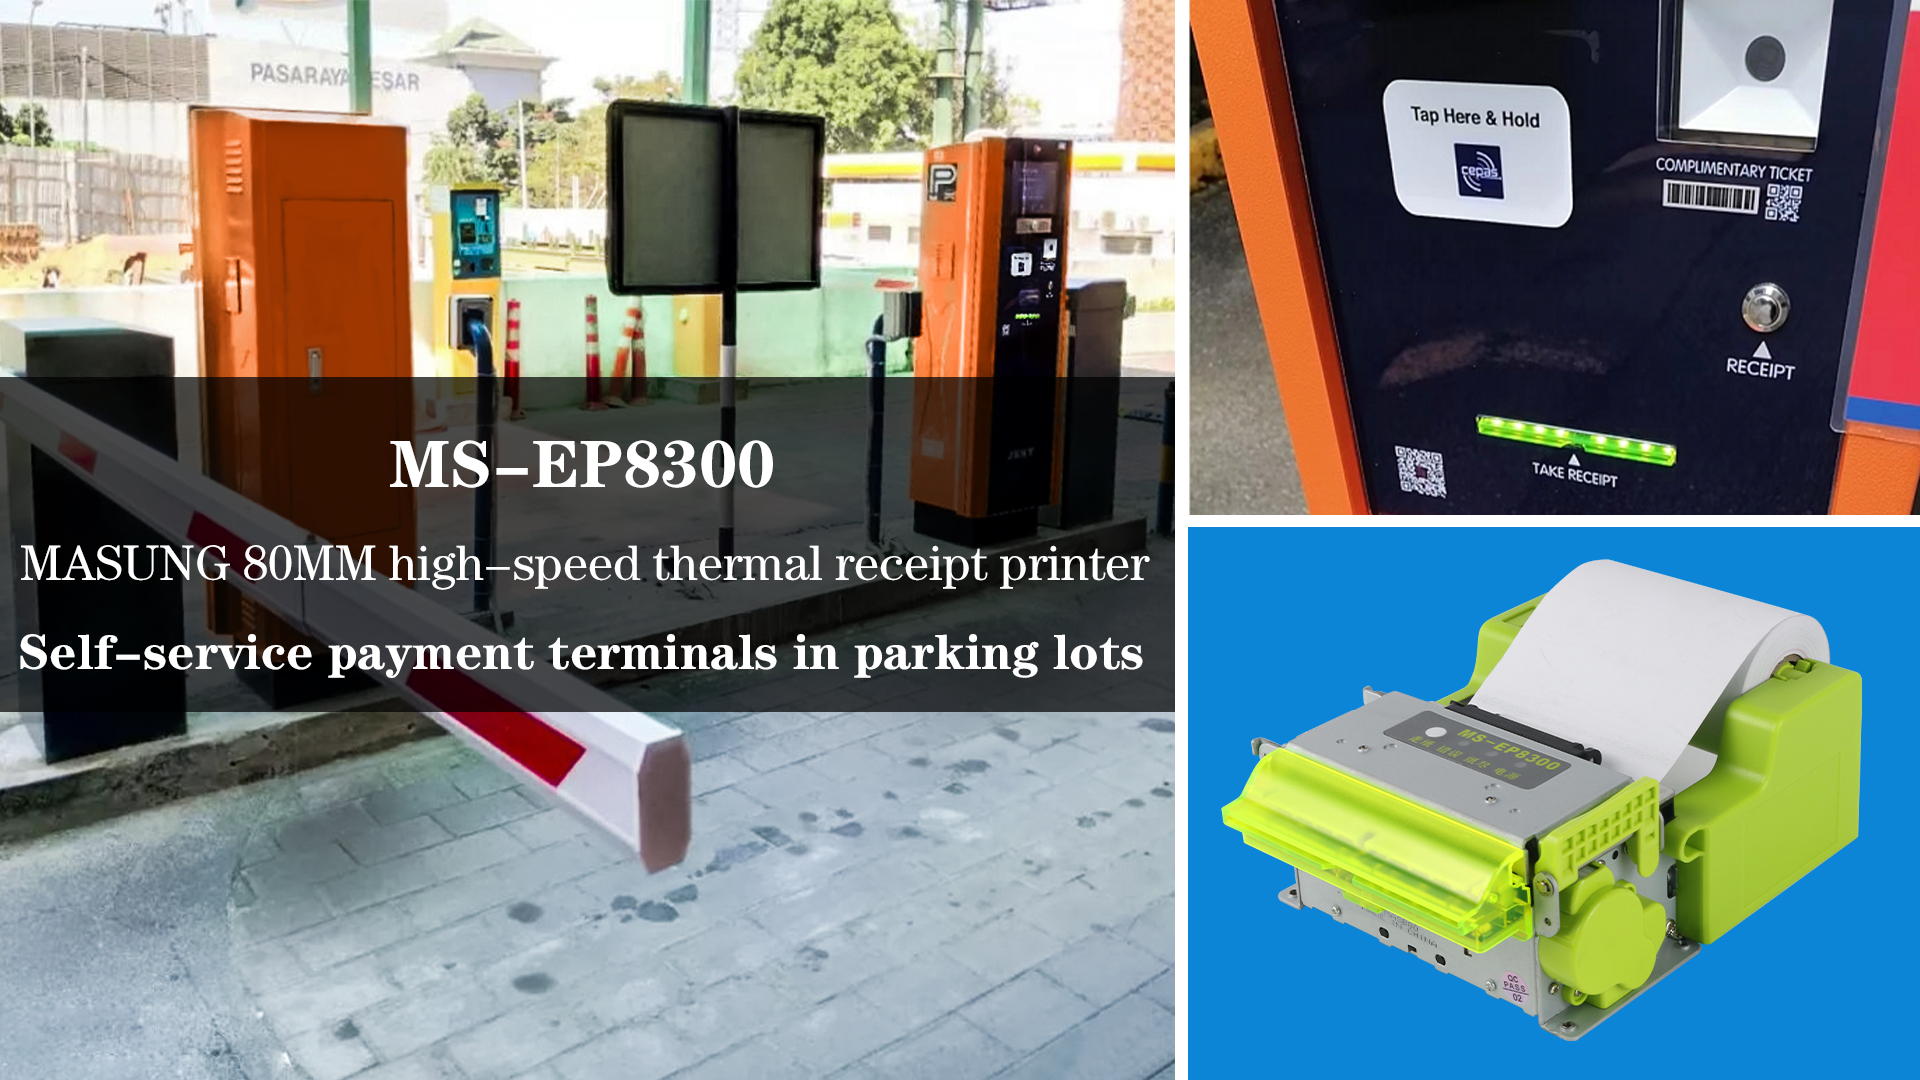 80MM high-speed thermal receipt printer MS-EP8300 is used for self-service payment in parking lots